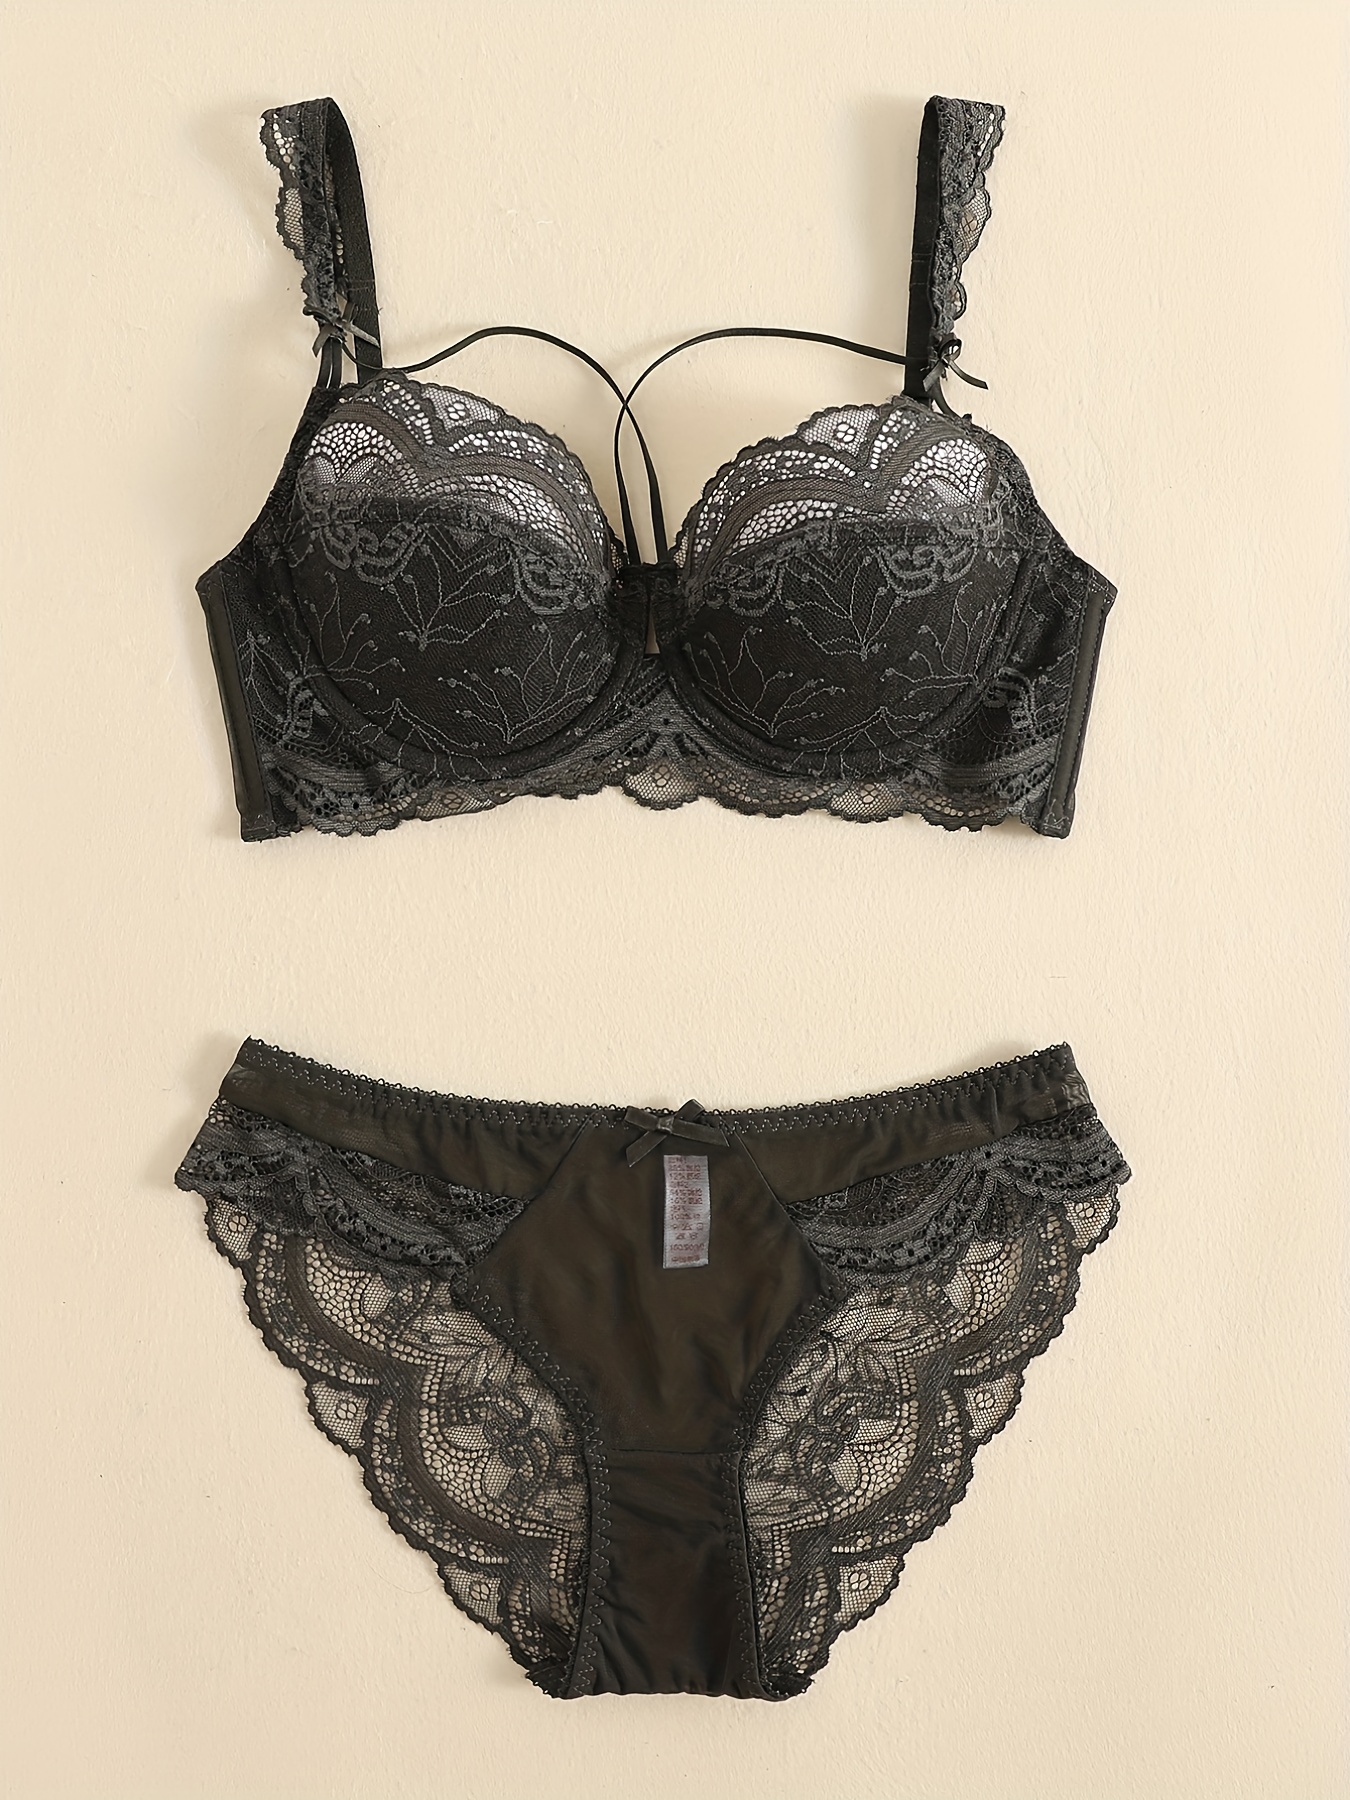 Logirlve New Lace Lingerie Set Push-up Bra And Panty Sets Hollow